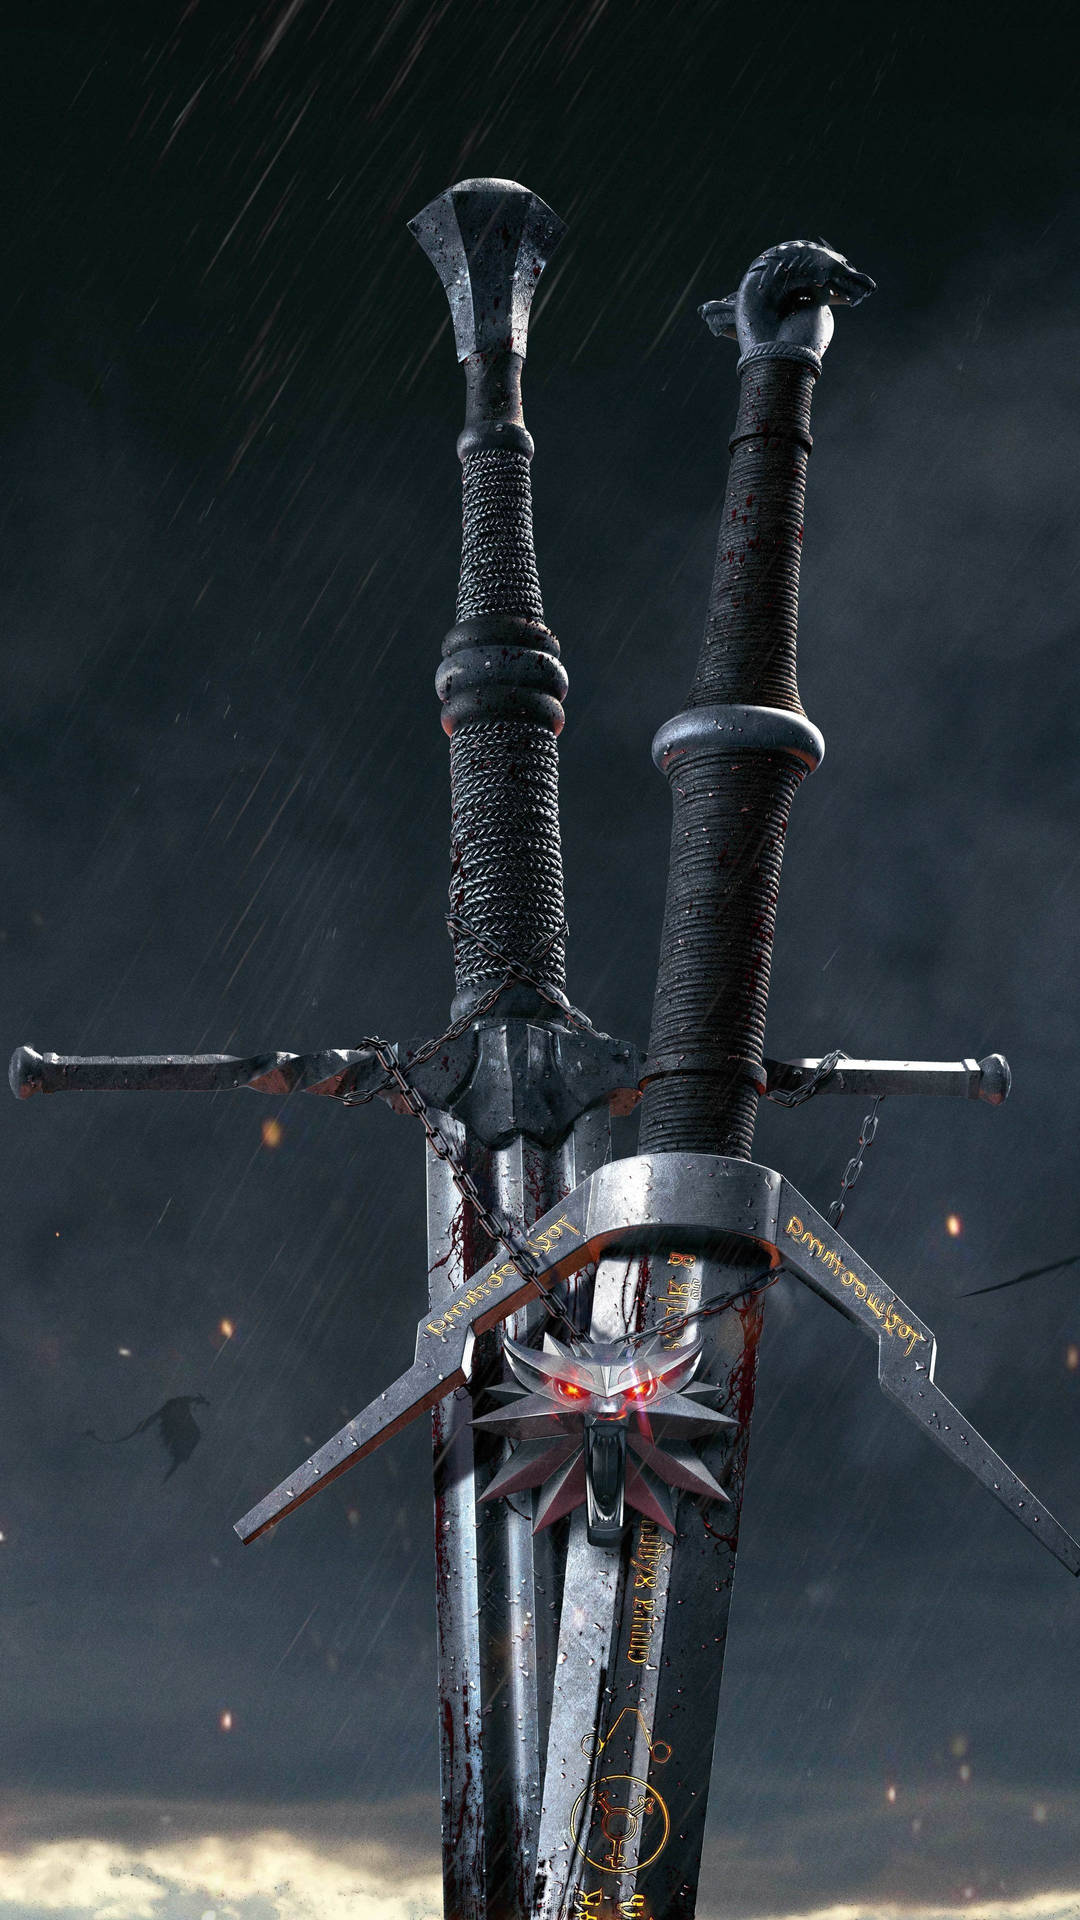 Aerondight Swords Witcher 3 Android Wallpaper